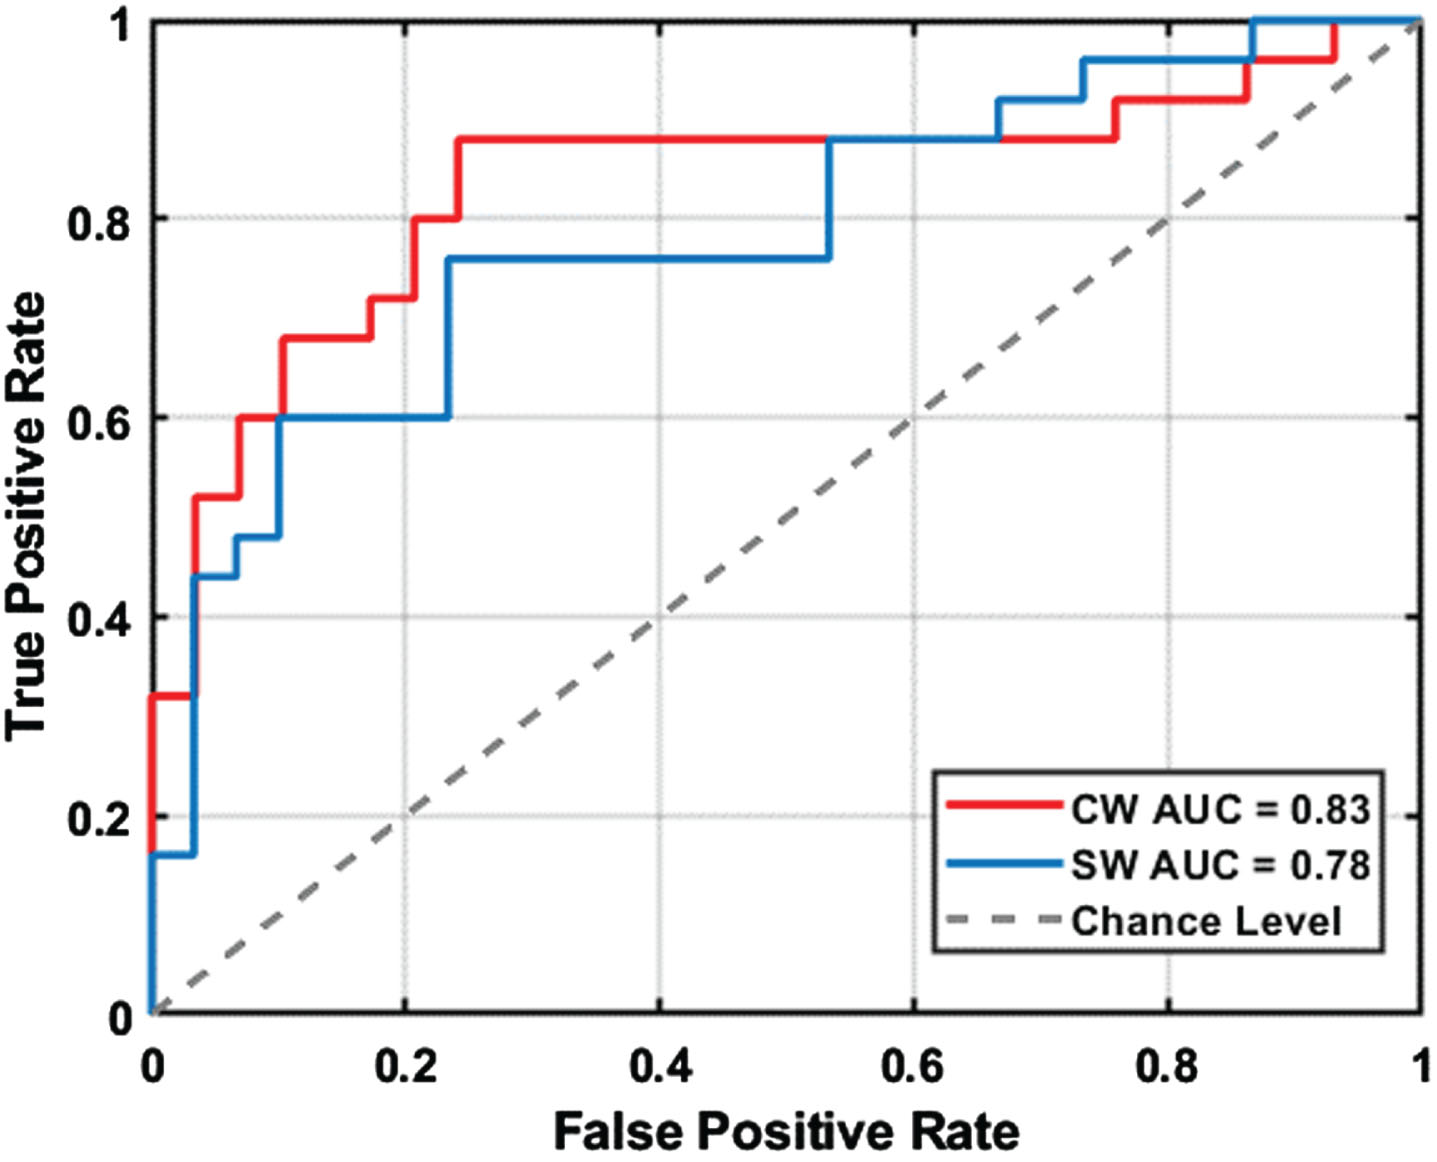 Receiver operating characteristic (ROC) curves comparing the diagnostic performance of curved walking (CW) and straight walking (SW) in discriminating between mild cognitive impairment (MCI) and healthy control (HC) participants. AUC: area under the curve.